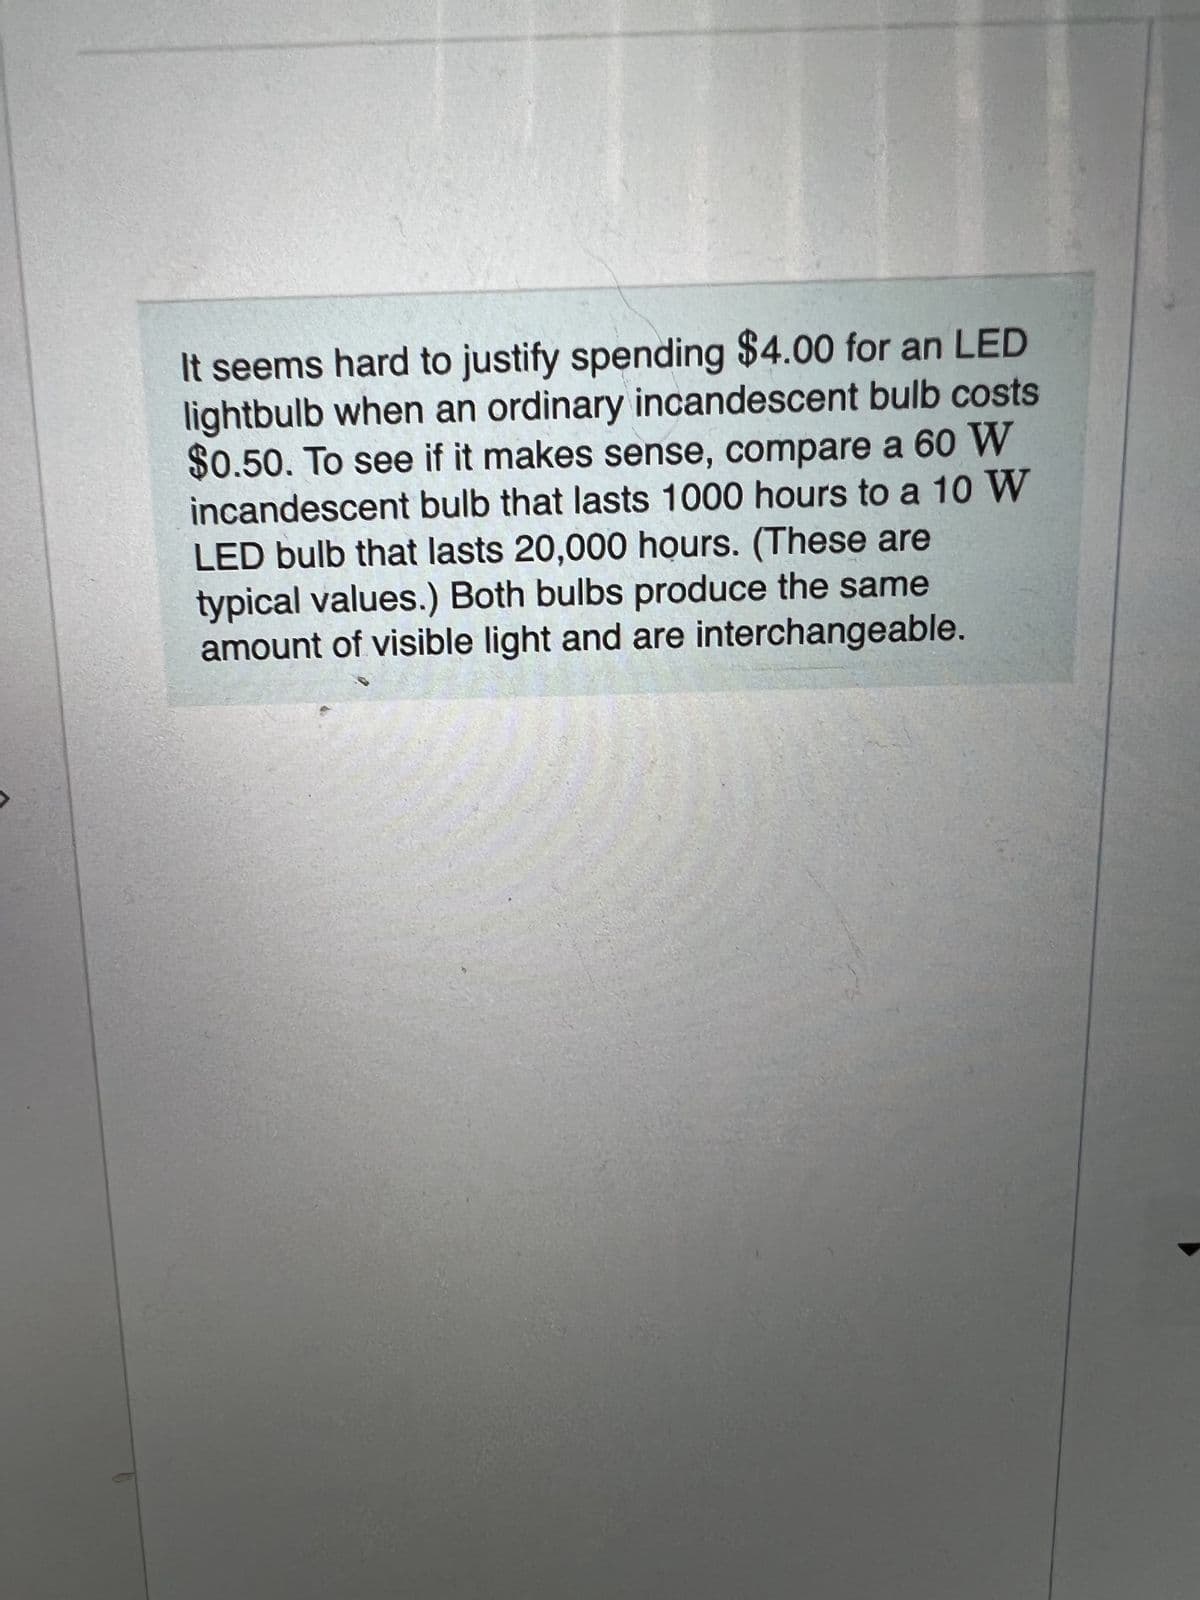 It seems hard to justify spending $4.00 for an LED
lightbulb when an ordinary incandescent bulb costs
$0.50. To see if it makes sense, compare a 60 W
incandescent bulb that lasts 1000 hours to a 10 W
LED bulb that lasts 20,000 hours. (These are
typical values.) Both bulbs produce the same
amount of visible light and are interchangeable.